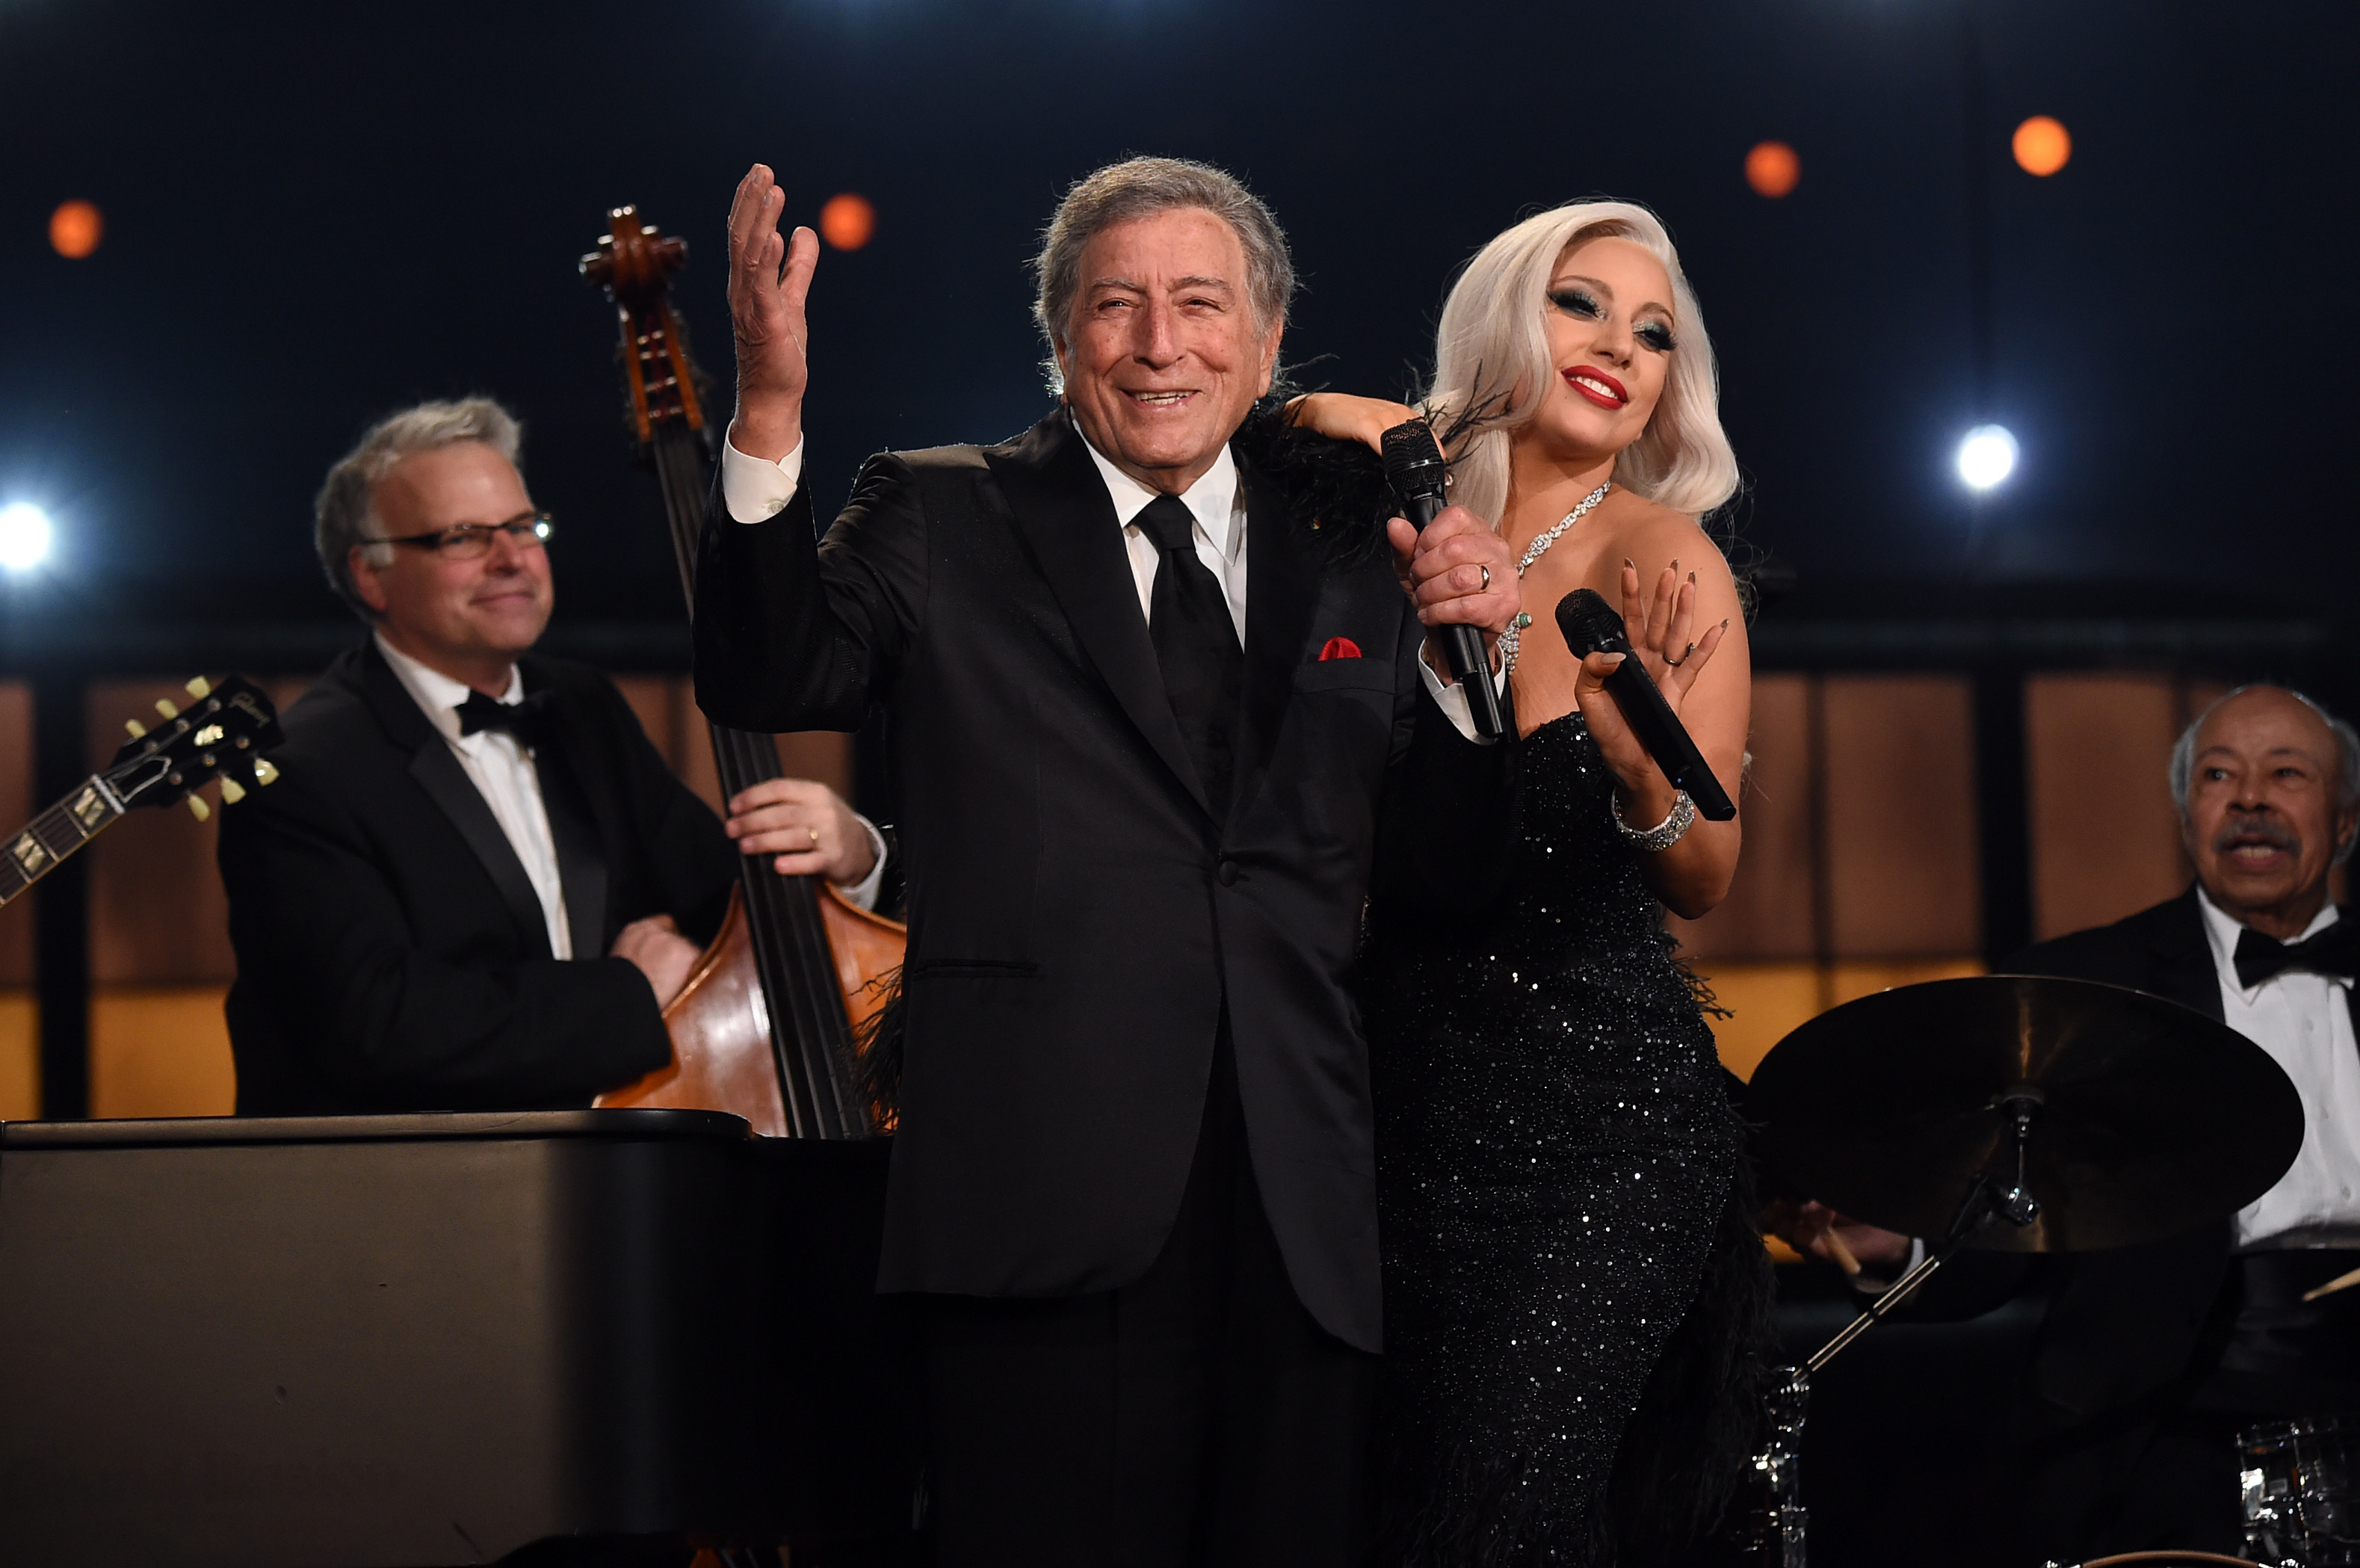 Tony Bennett and Lady Gaga perform performing at The 57th Annual GRAMMY Awards on February 8, 2015, in Los Angeles, California. | Source: Getty Images